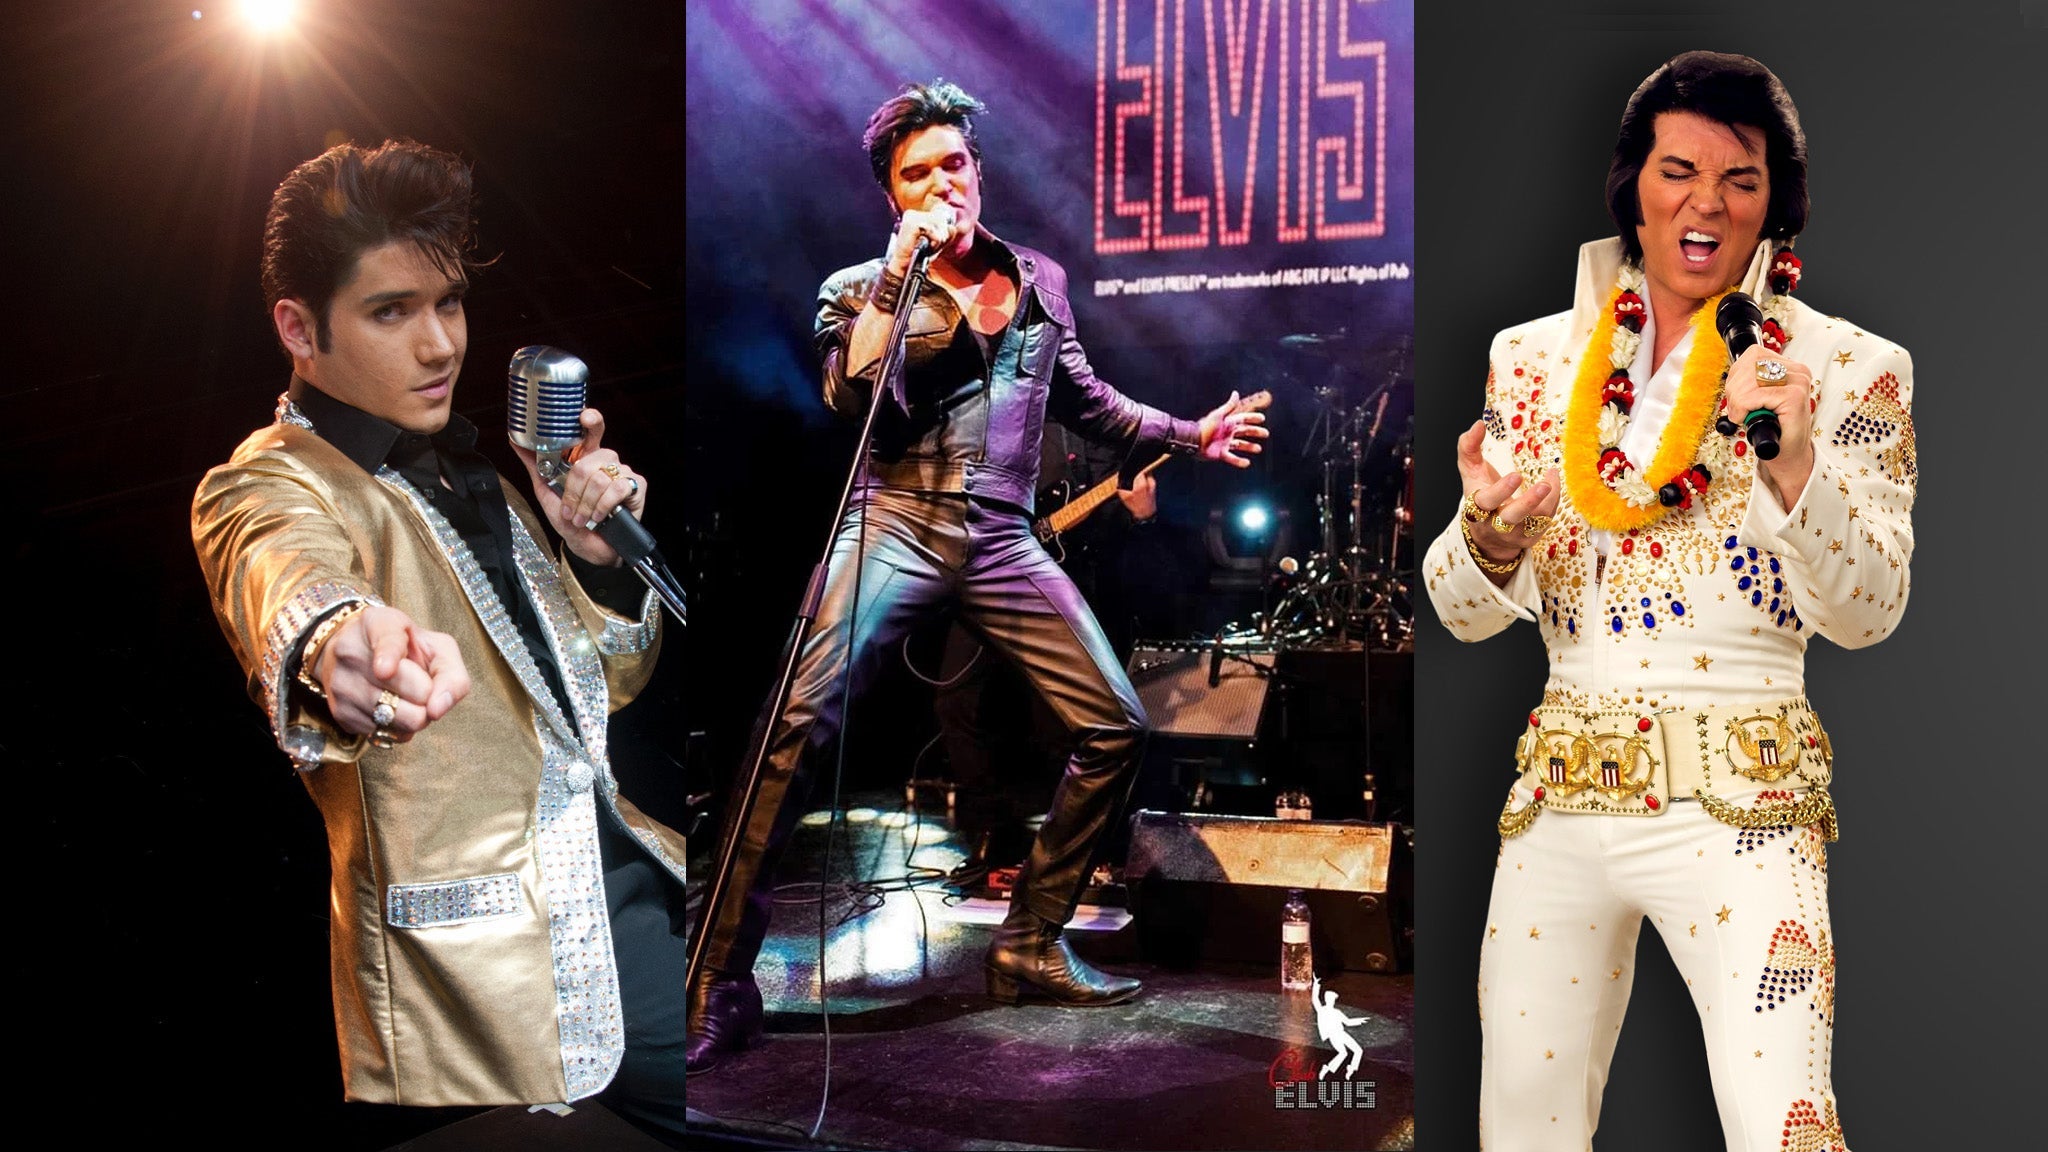 One Night with The King - 3 World Champion Elvis Performers in Winnipeg promo photo for Club Card & CJOB Radio presale offer code